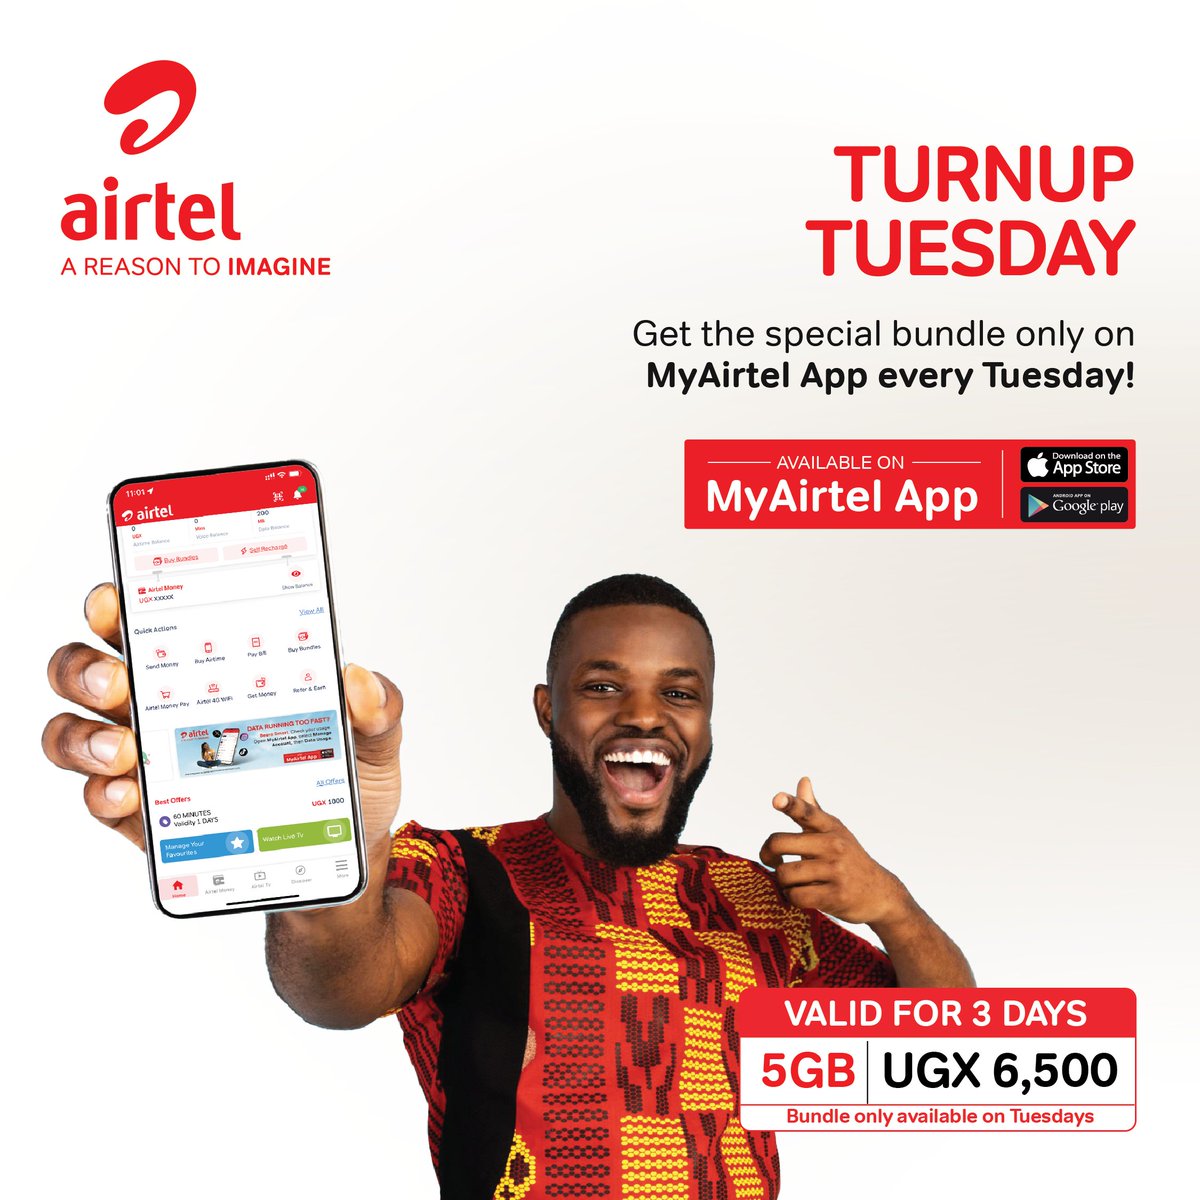 Tuesday just got a whole lot brighter! Unwrap the joy of savings and rewards with the exclusive #TurnUpTuesday bundle on #MyAirtelApp. Don't miss out: airtelafrica.onelink.me/cGyr/qgj4qeu2